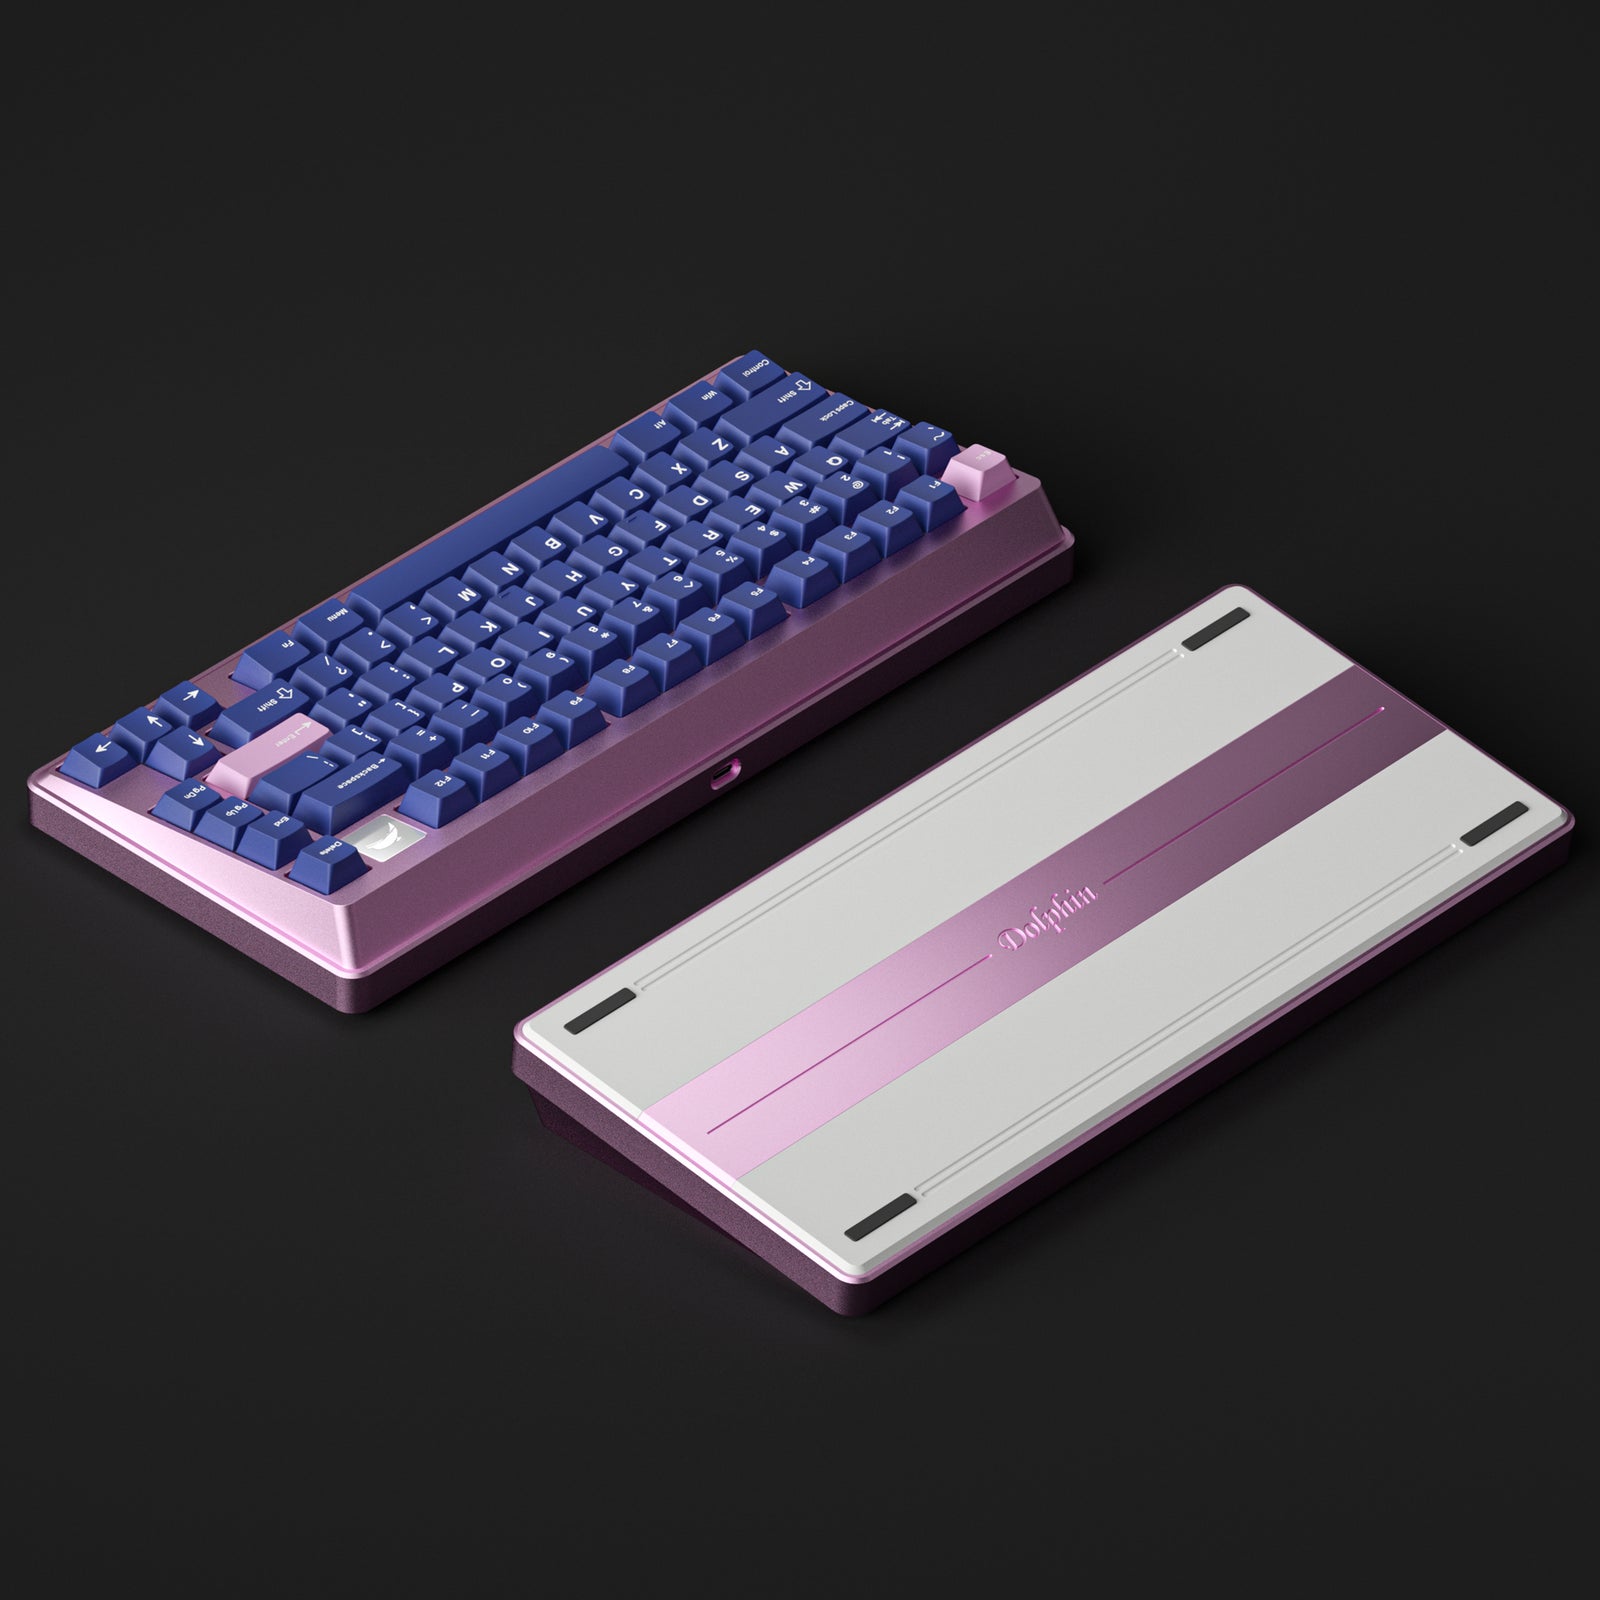 [Extra] Dolphins75 Mechanical Keyboard Kit